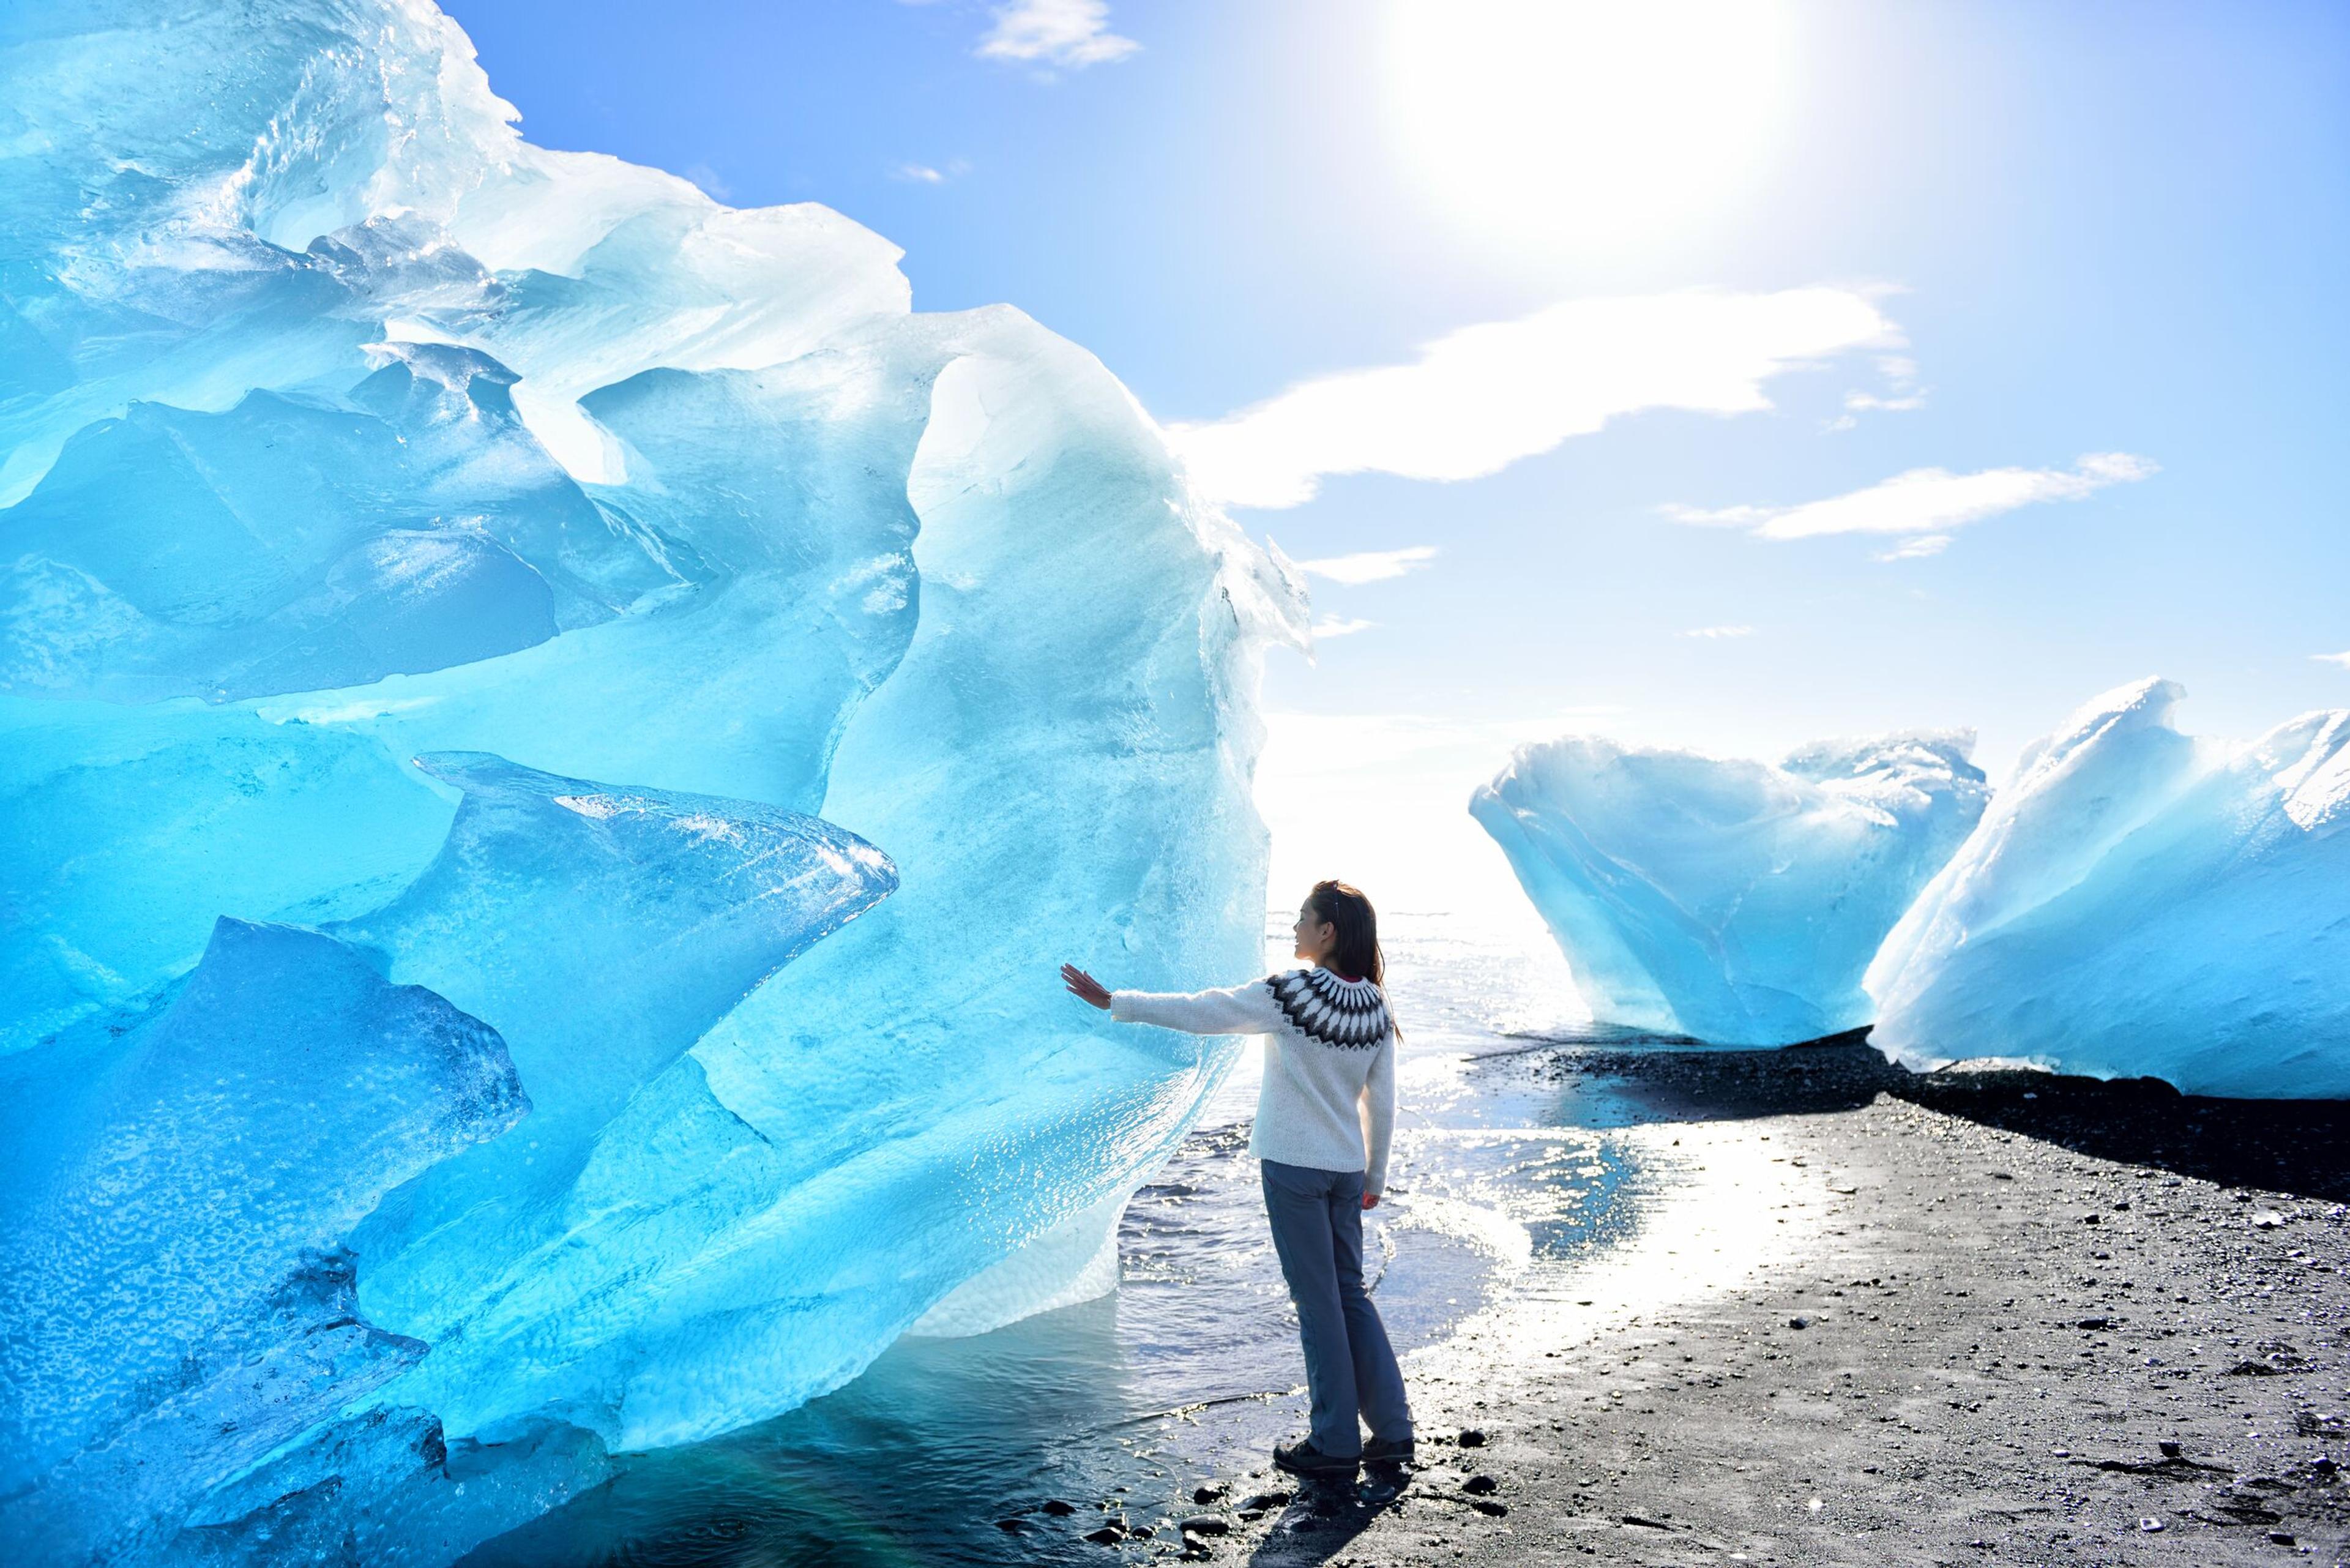 A person standing by an iceberg by the diamond beach shore in the soucth coast of Iceland.